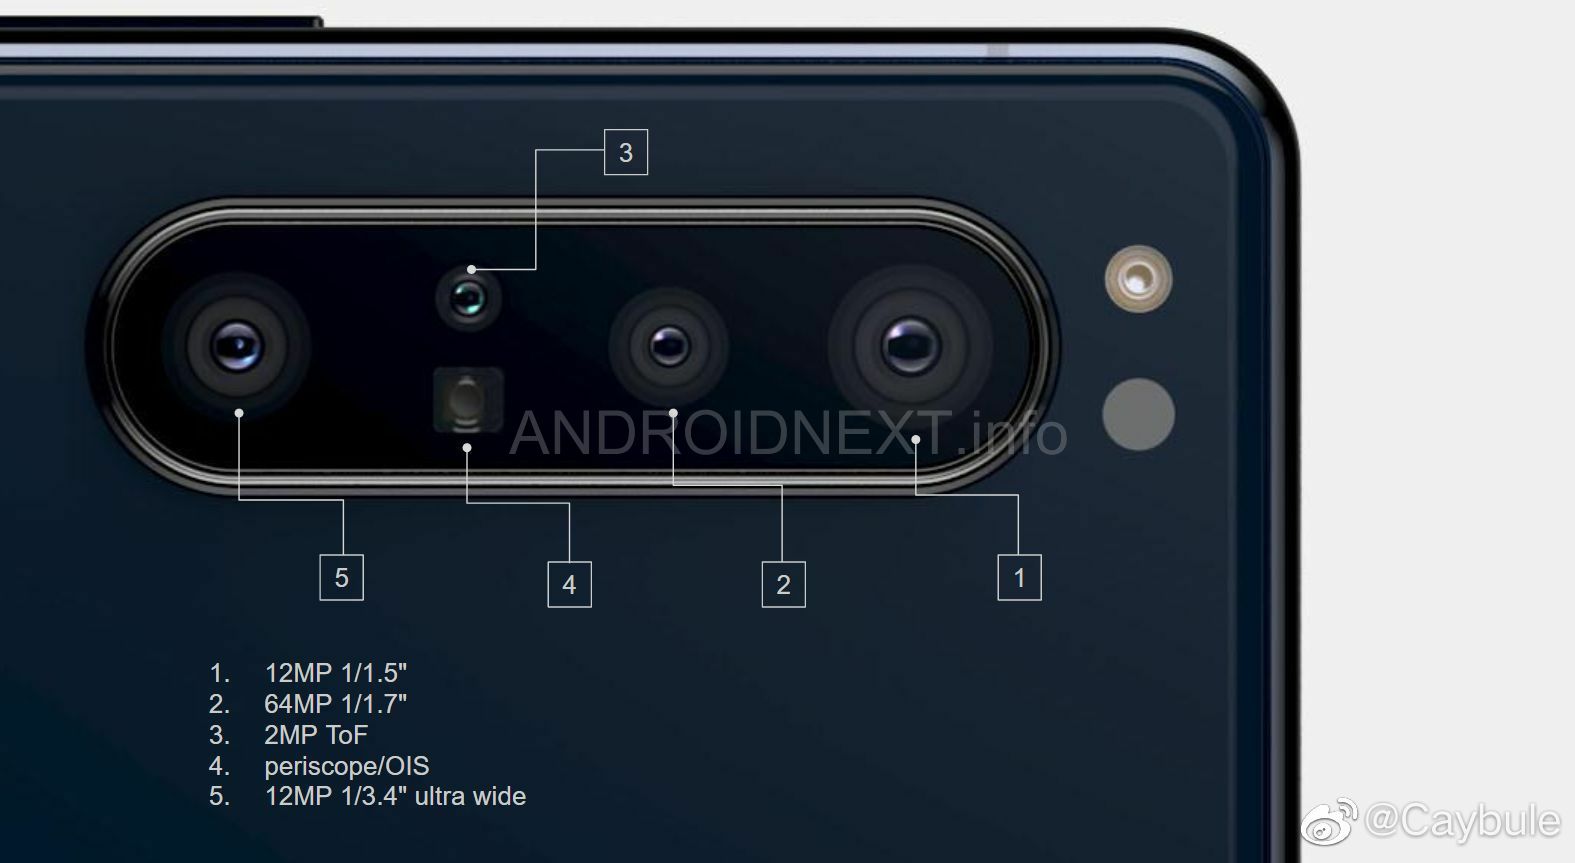 xperia 1.1 "width =" 1575 "height =" 863 "srcset =" https://assets.mspimages.in/wp-content/uploads/2020/01/xperia-1.1.jpg 1575w, https: //assets.mspimages .in / wp-content / uploads / 2020/01 / xperia-1.1-300x164.jpg 300w, https://assets.mspimages.in/wp-content/uploads/2020/01/xperia-1.1-768x421.jpg 768w, https://assets.mspimages.in/wp-content/uploads/2020/01/xperia-1.1-1024x561.jpg 1024w, https://assets.mspimages.in/wp-content/uploads/2020/01/ xperia-1.1-696x381.jpg 696w, https://assets.mspimages.in/wp-content/uploads/2020/01/xperia-1.1-1068x585.jpg 1068w, https://assets.mspimages.in/wp- content / uploads / 2020/01 / xperia-1.1-767x420.jpg 767w, https://assets.mspimages.in/wp-content/uploads/2020/01/xperia-1.1-50x27.jpg 50w "tamaño =" (ancho máximo: 1575px) 100vw, 1575px